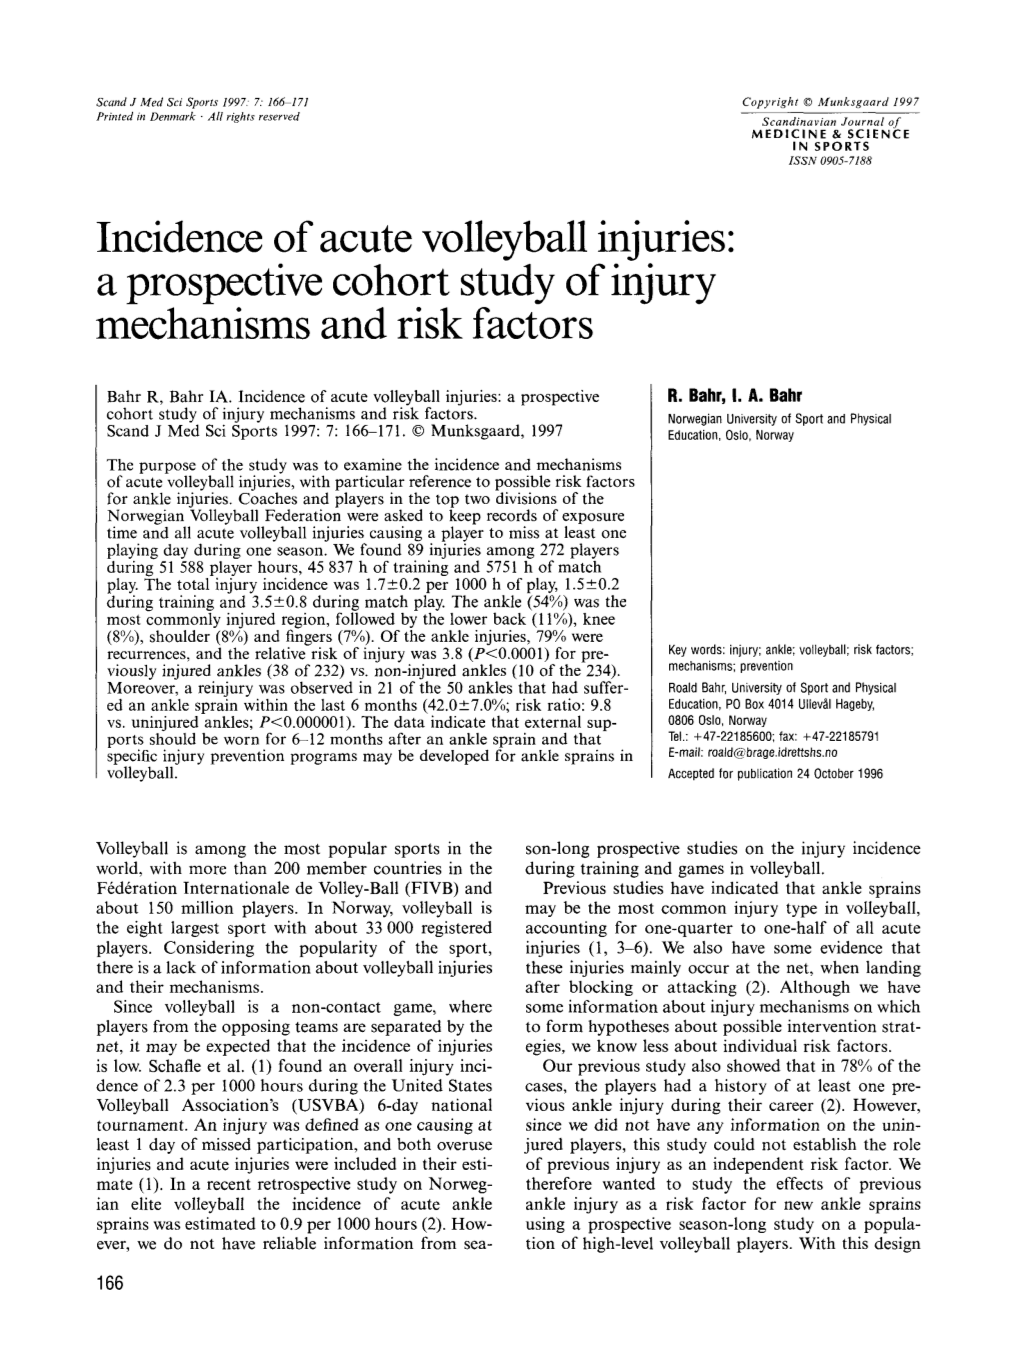 Incidence of Acute Volleyball Injuries: a Prospective Cohort Study of Injury Mechanisms and Risk Factors